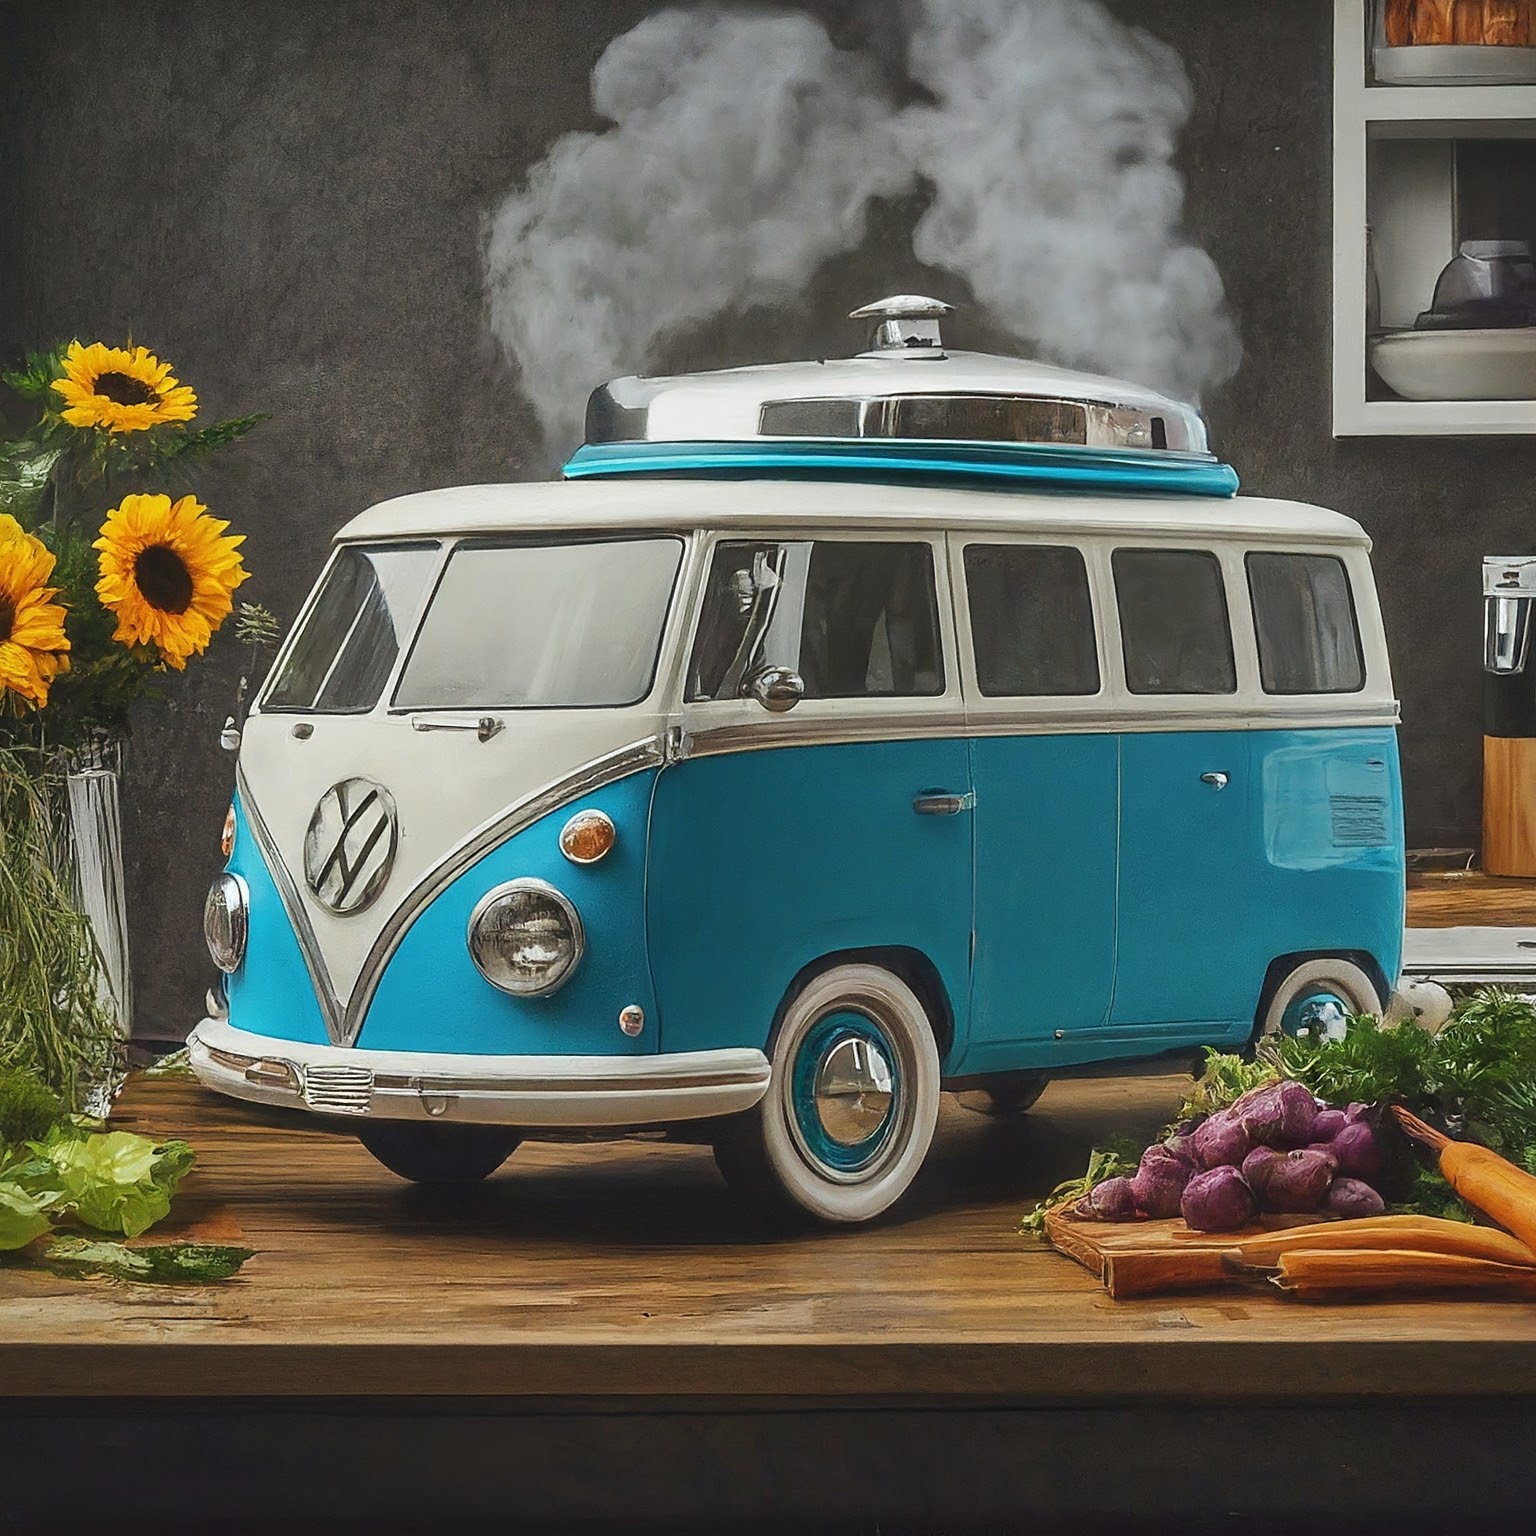 Volkswagen Bus Shaped Slow Cookers: Infusing Retro Vibes into Your Kitchen Adventure luxarts volkswagen bus slow cookers 10